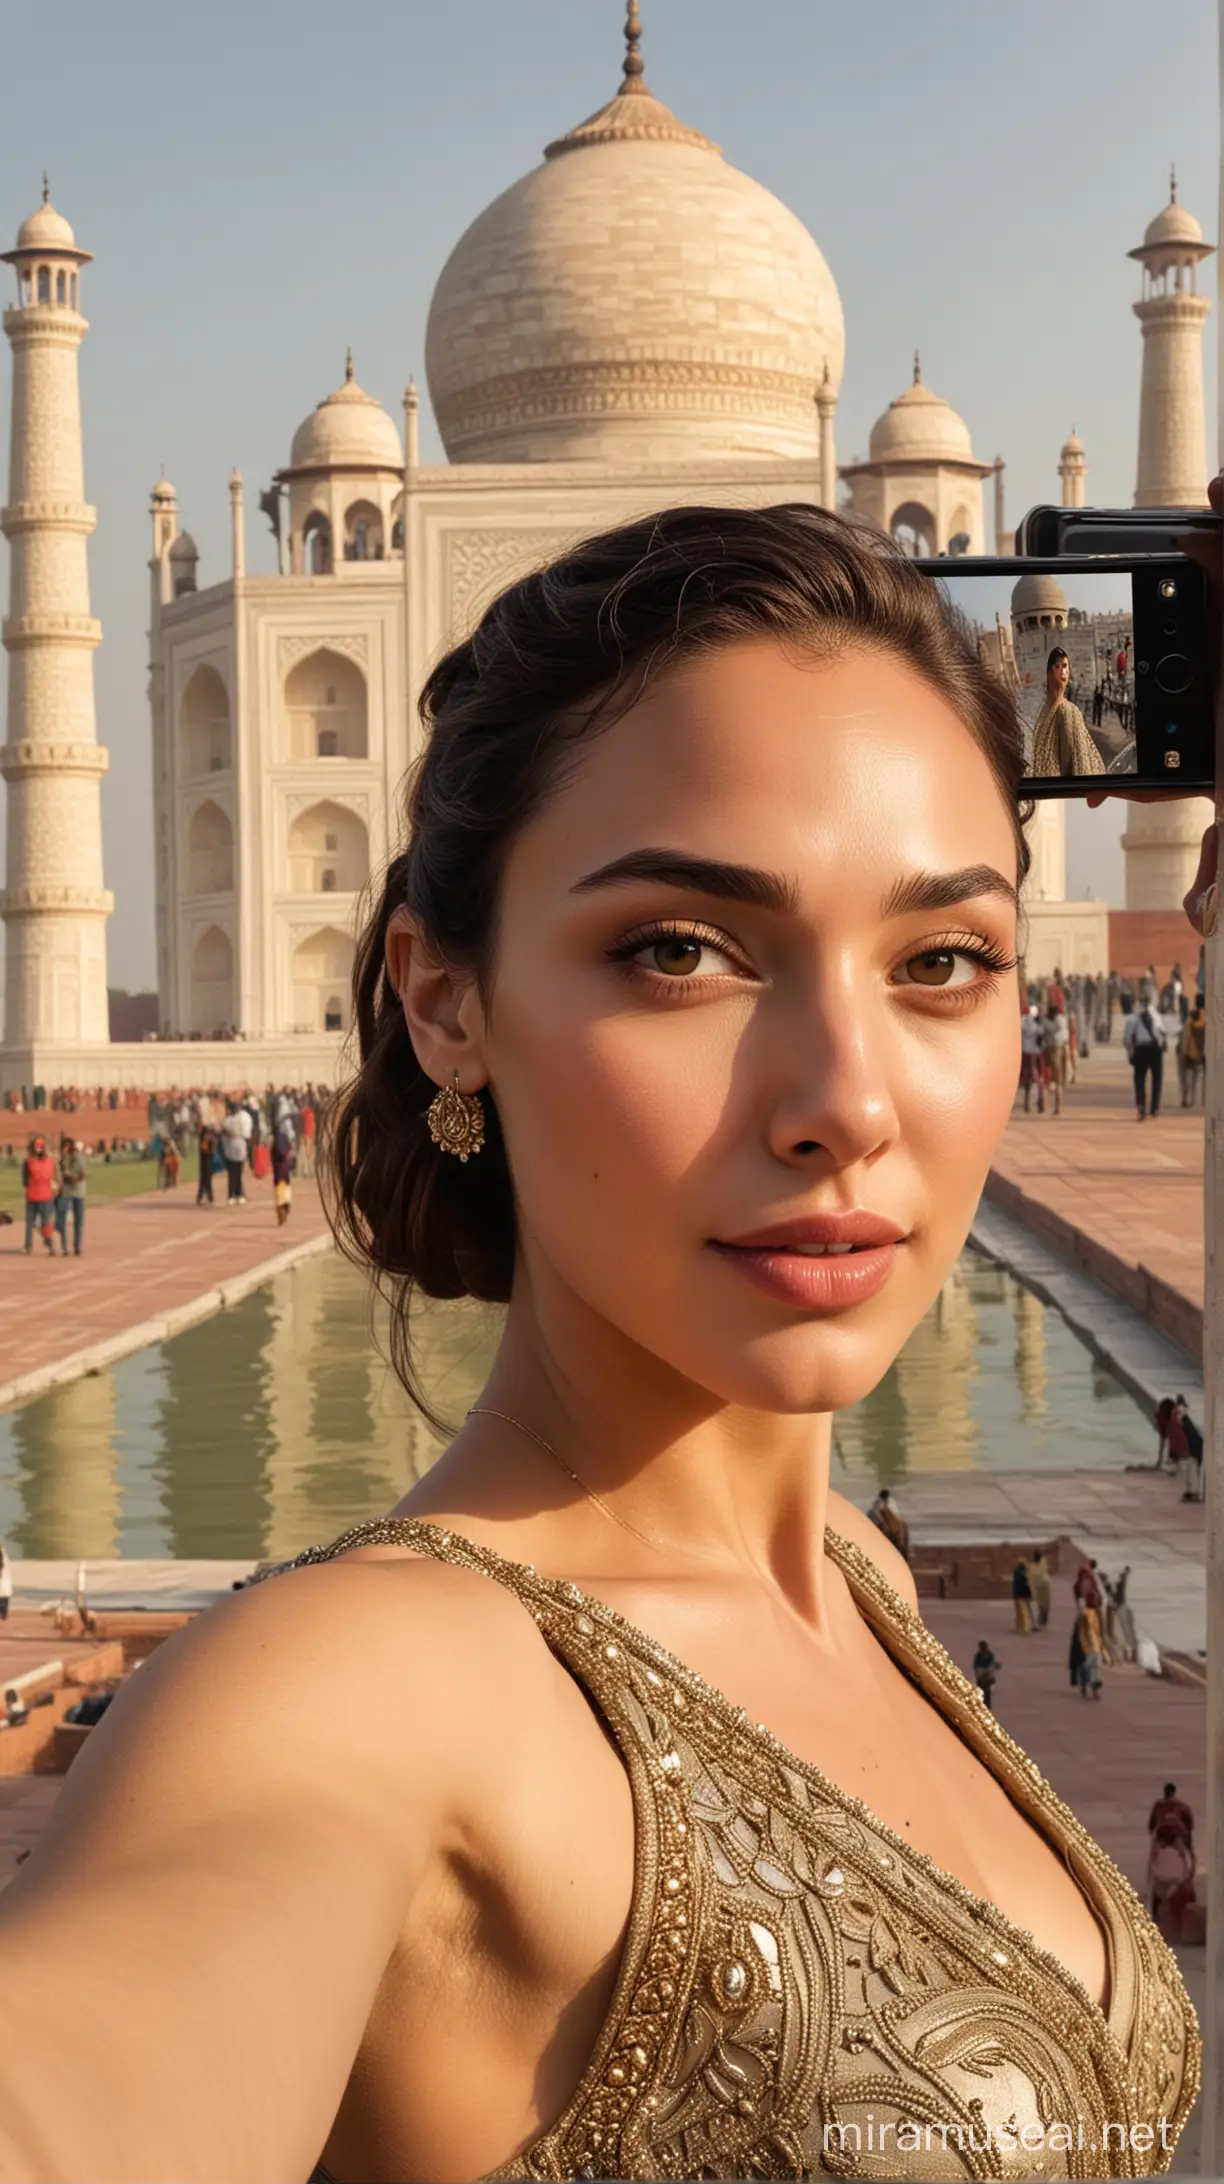 Create a highly detailed and sharp image of Gal Gadot taking a selfie in front of the Taj Mahal.